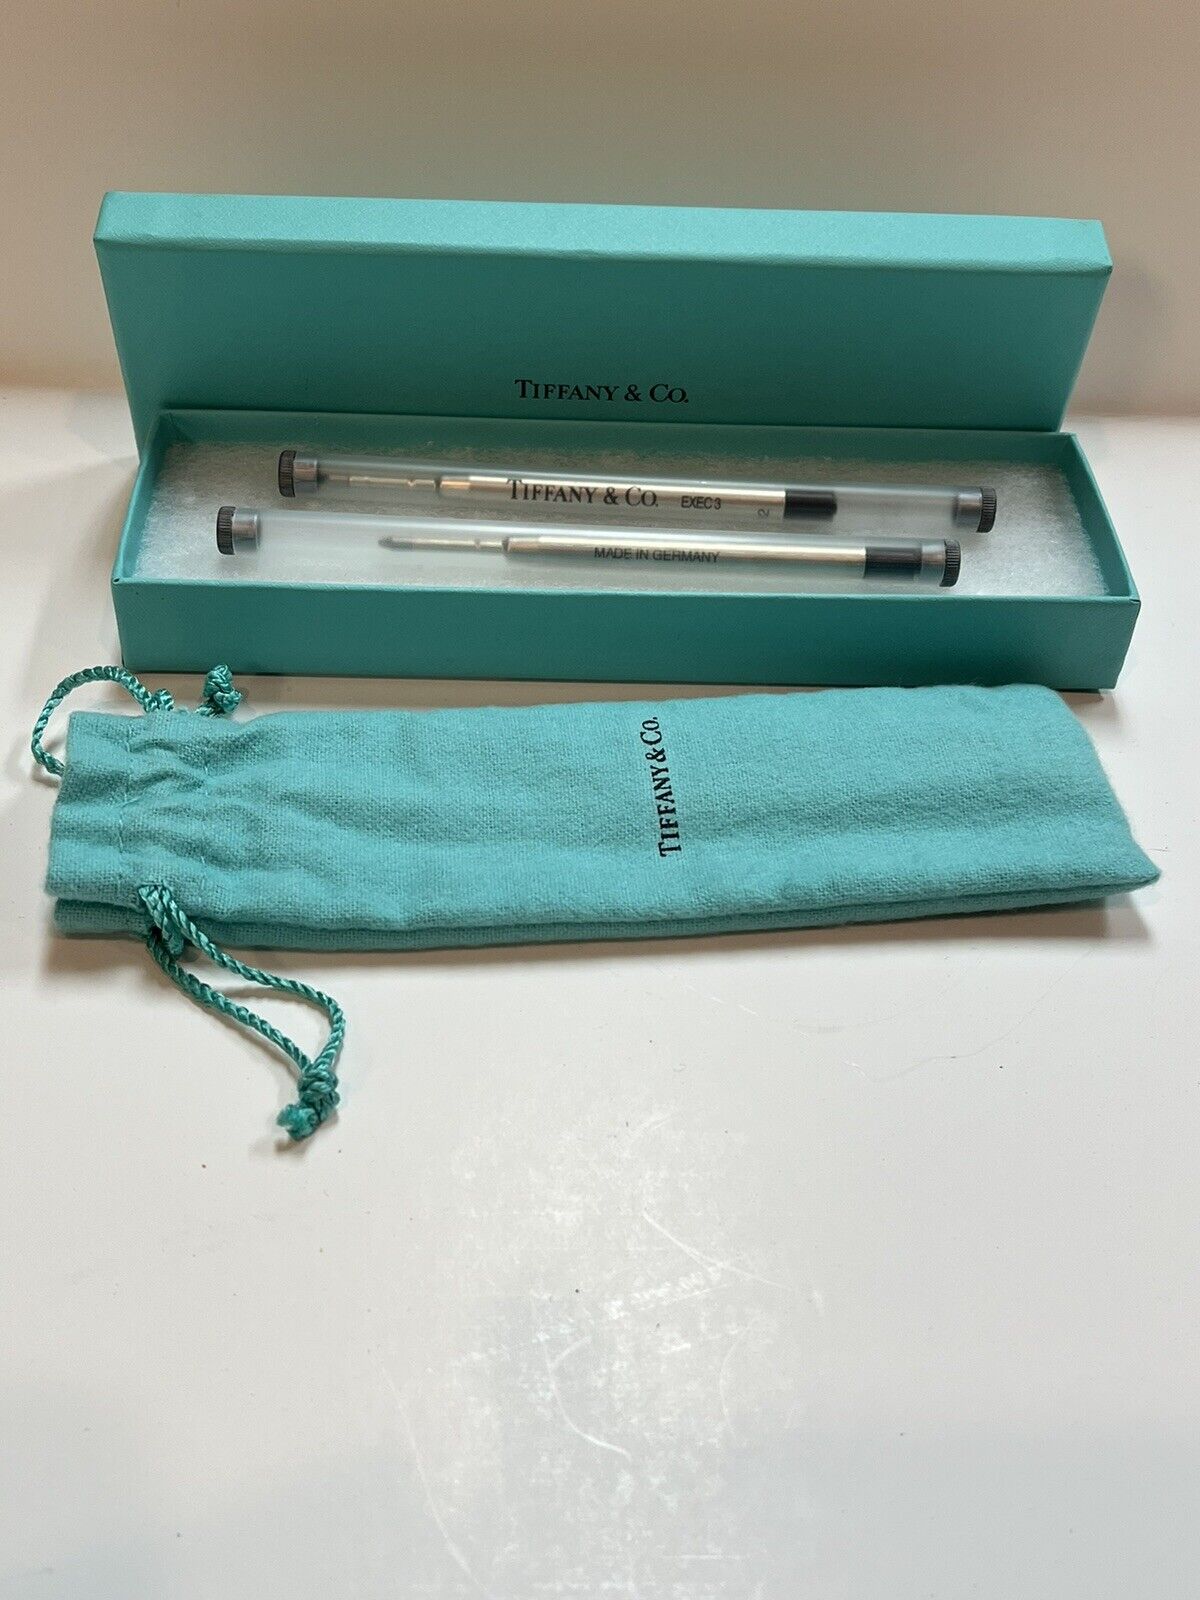 TIFFANY & CO. EXEC 3 # 101 And #102 PEN REFILLS MADE IN GERMANT